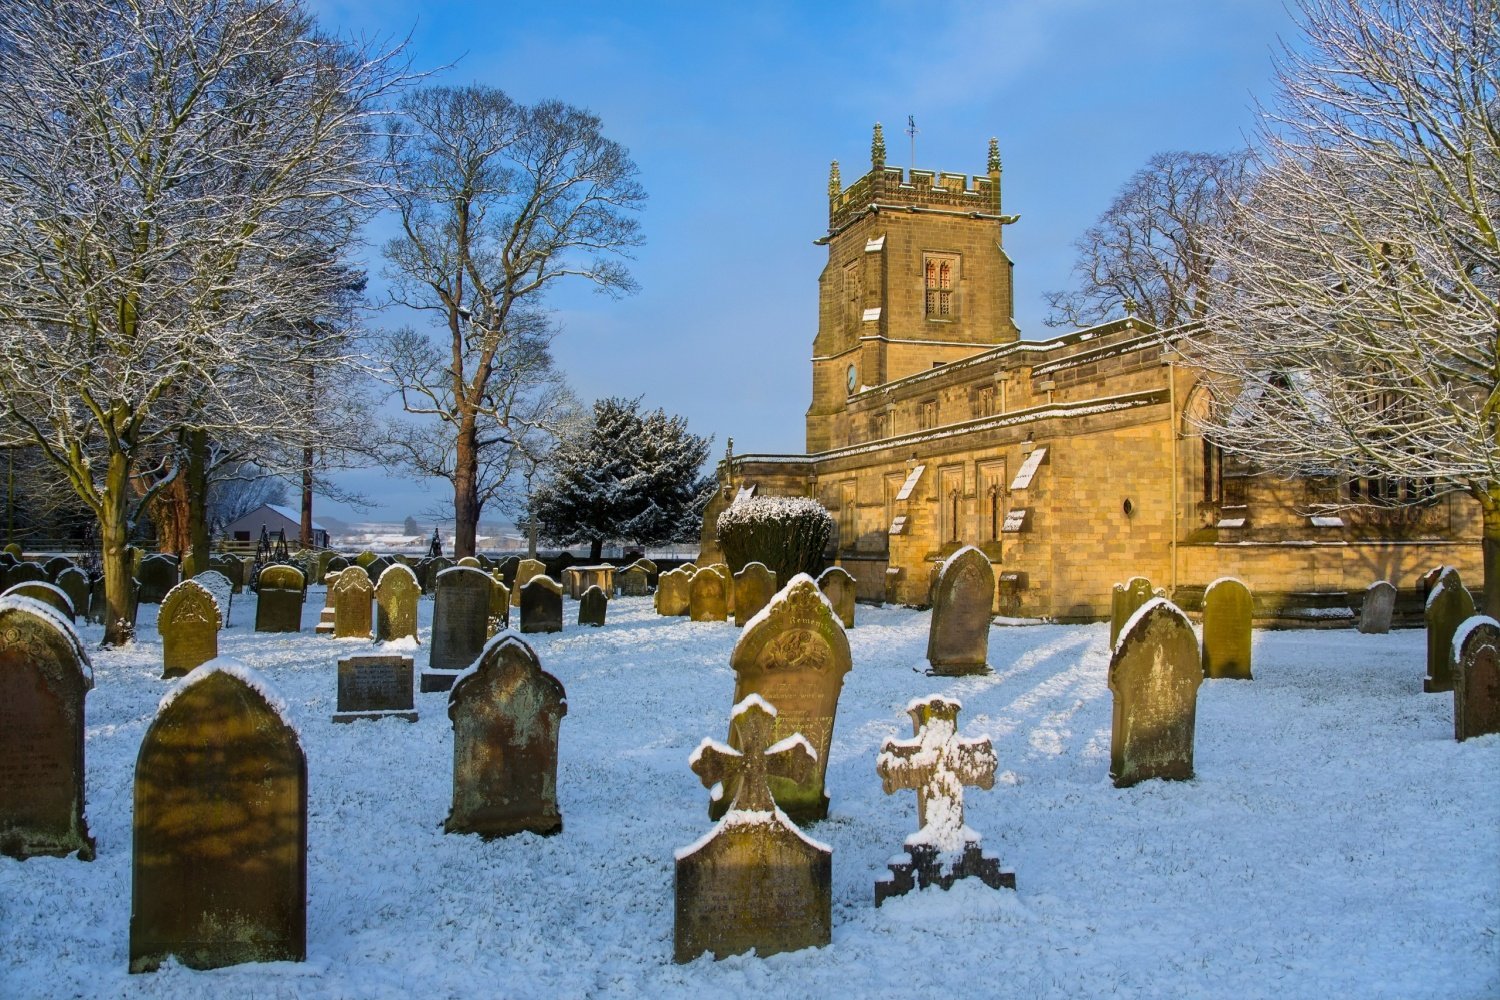 Image name slingsby north yorkshire church in snow the 13 image from the post Slingsby, North Yorkshire in Yorkshire.com.